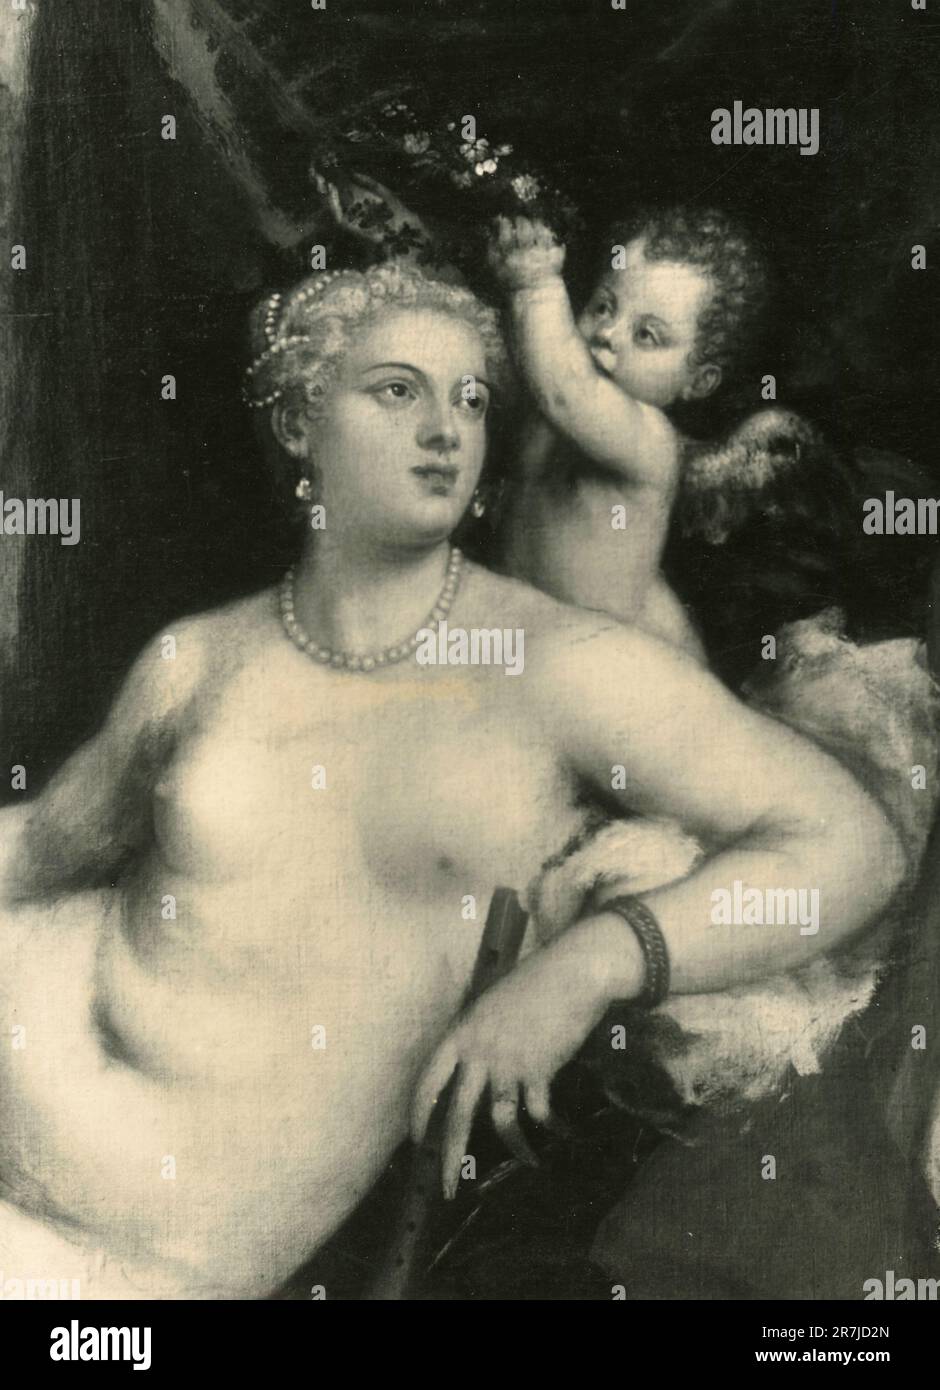 Detail of Venus and the Lute player, painting by Italian artist Titian, Metropolitan Museum, NY USA 1900s Stock Photo